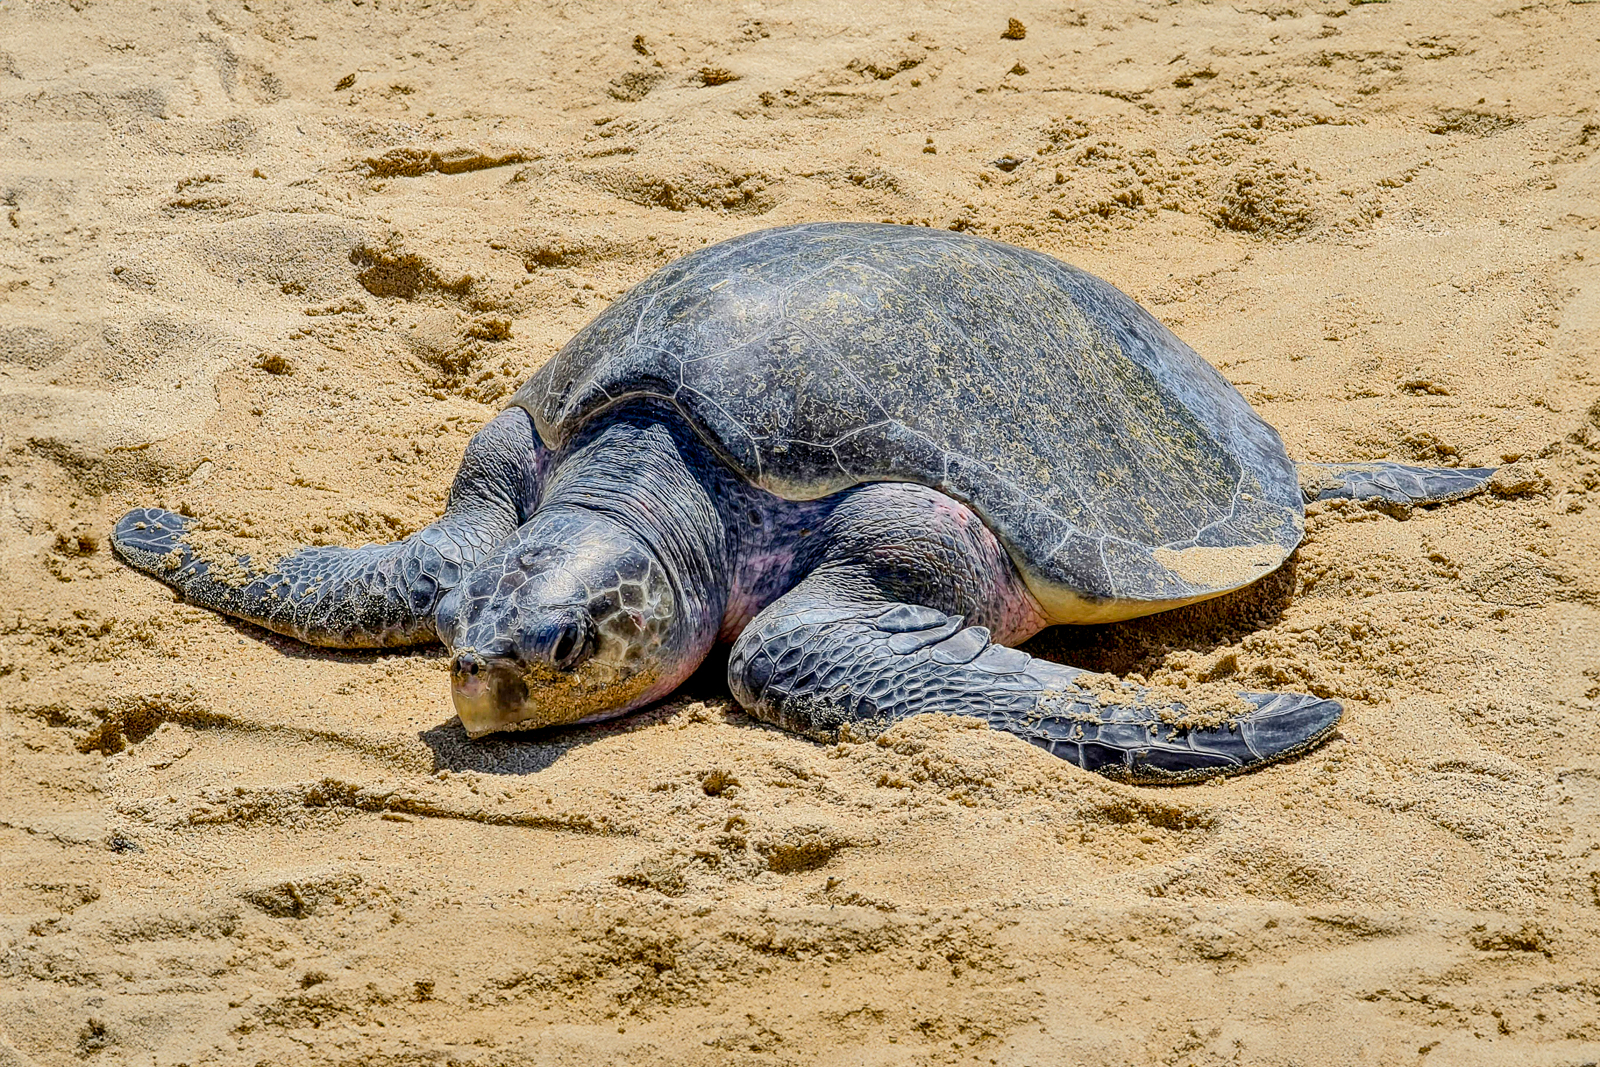 An Olive Ridley sea turtle nesting on the shores of Santa Teresa National Park in Uruguay